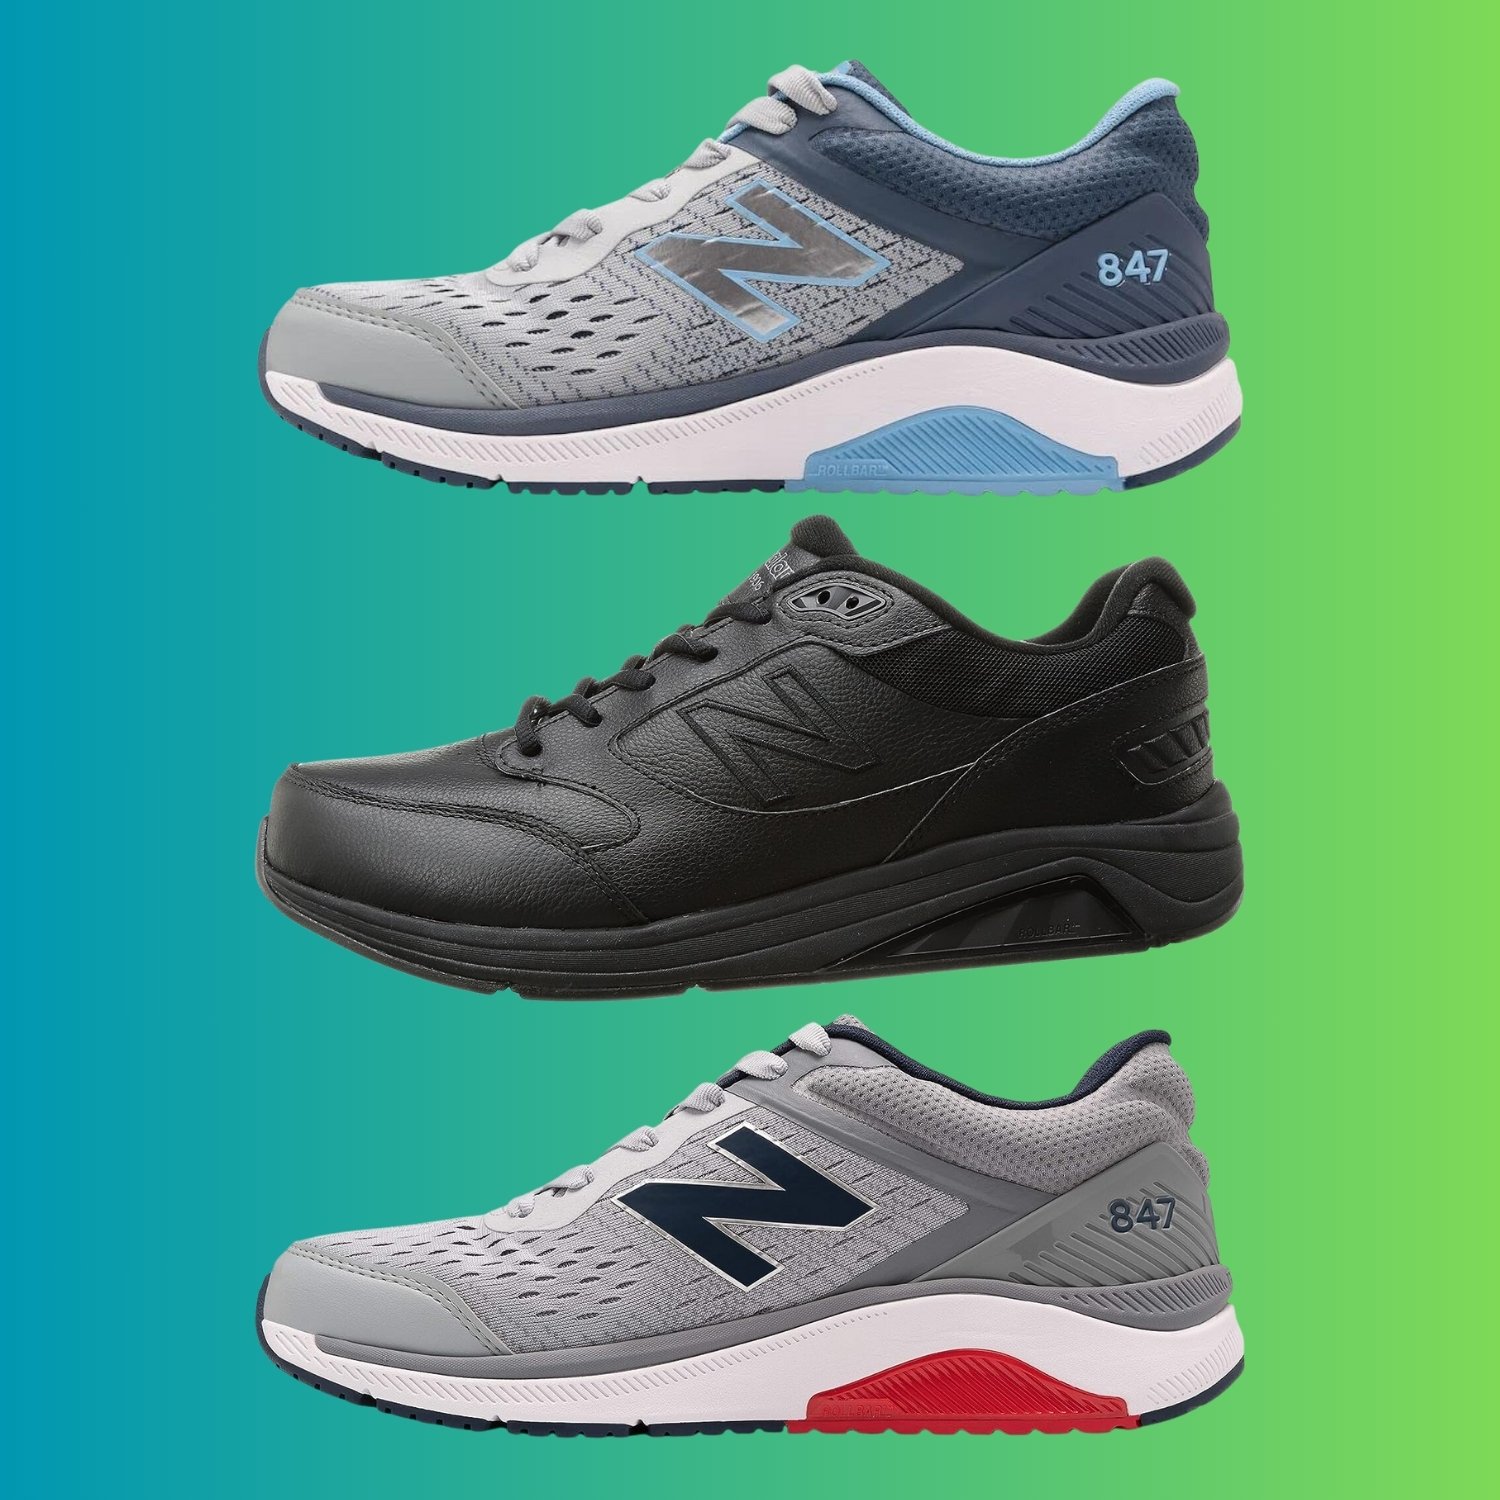 8 Best New Balance Walking Shoes-Upgrade Your Walking Sneakers Today!